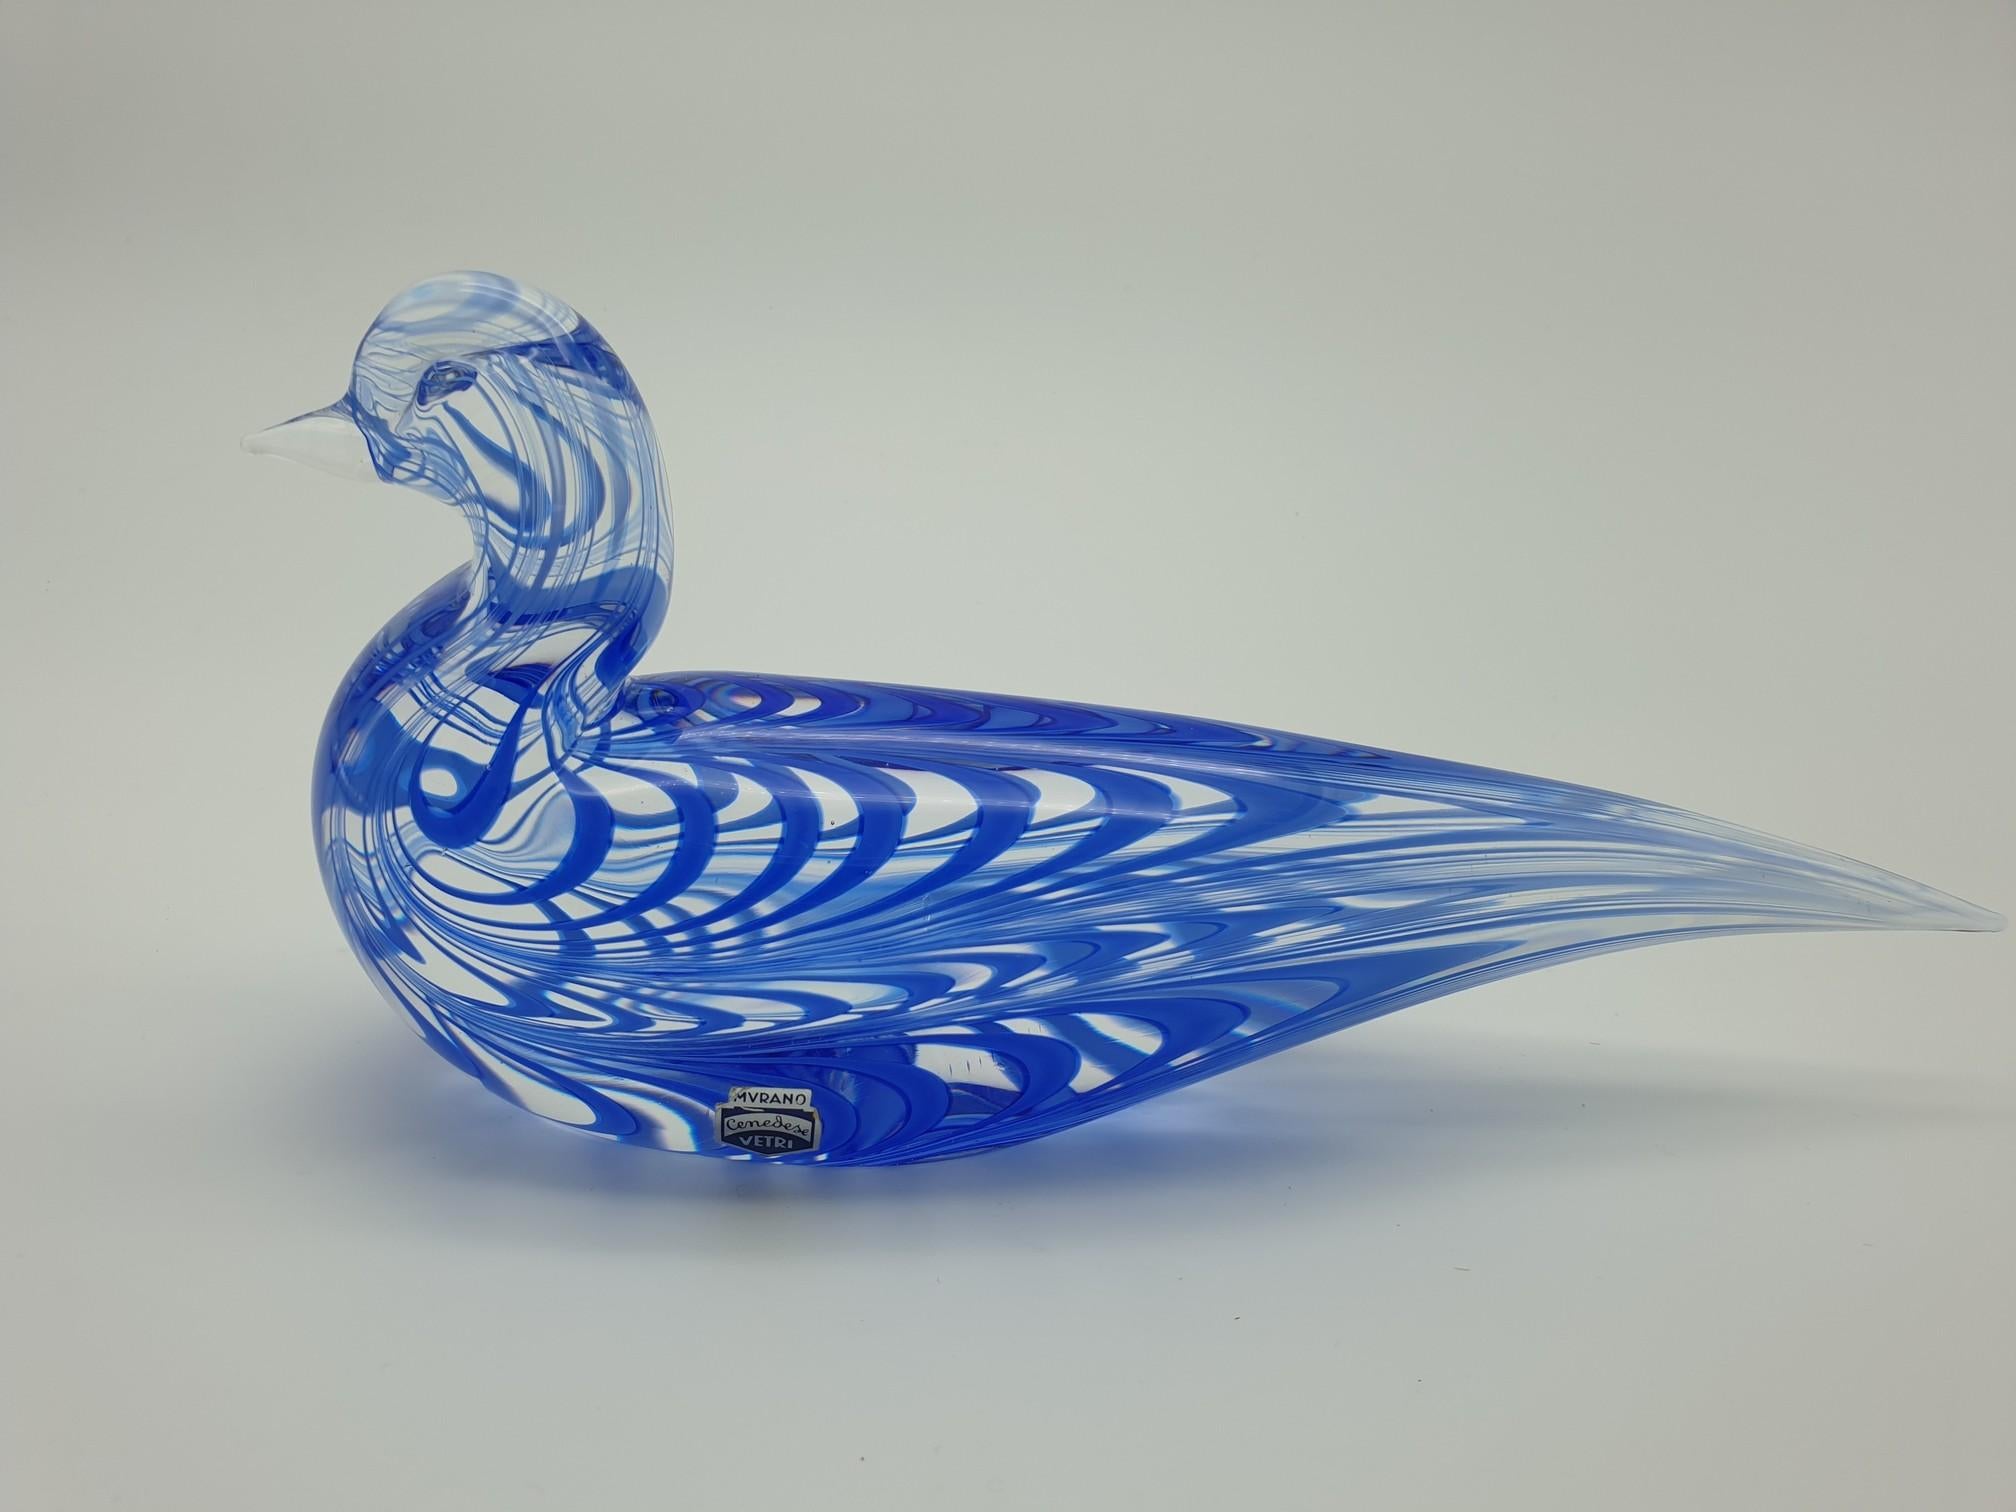 Glass bird in clear color with blue 